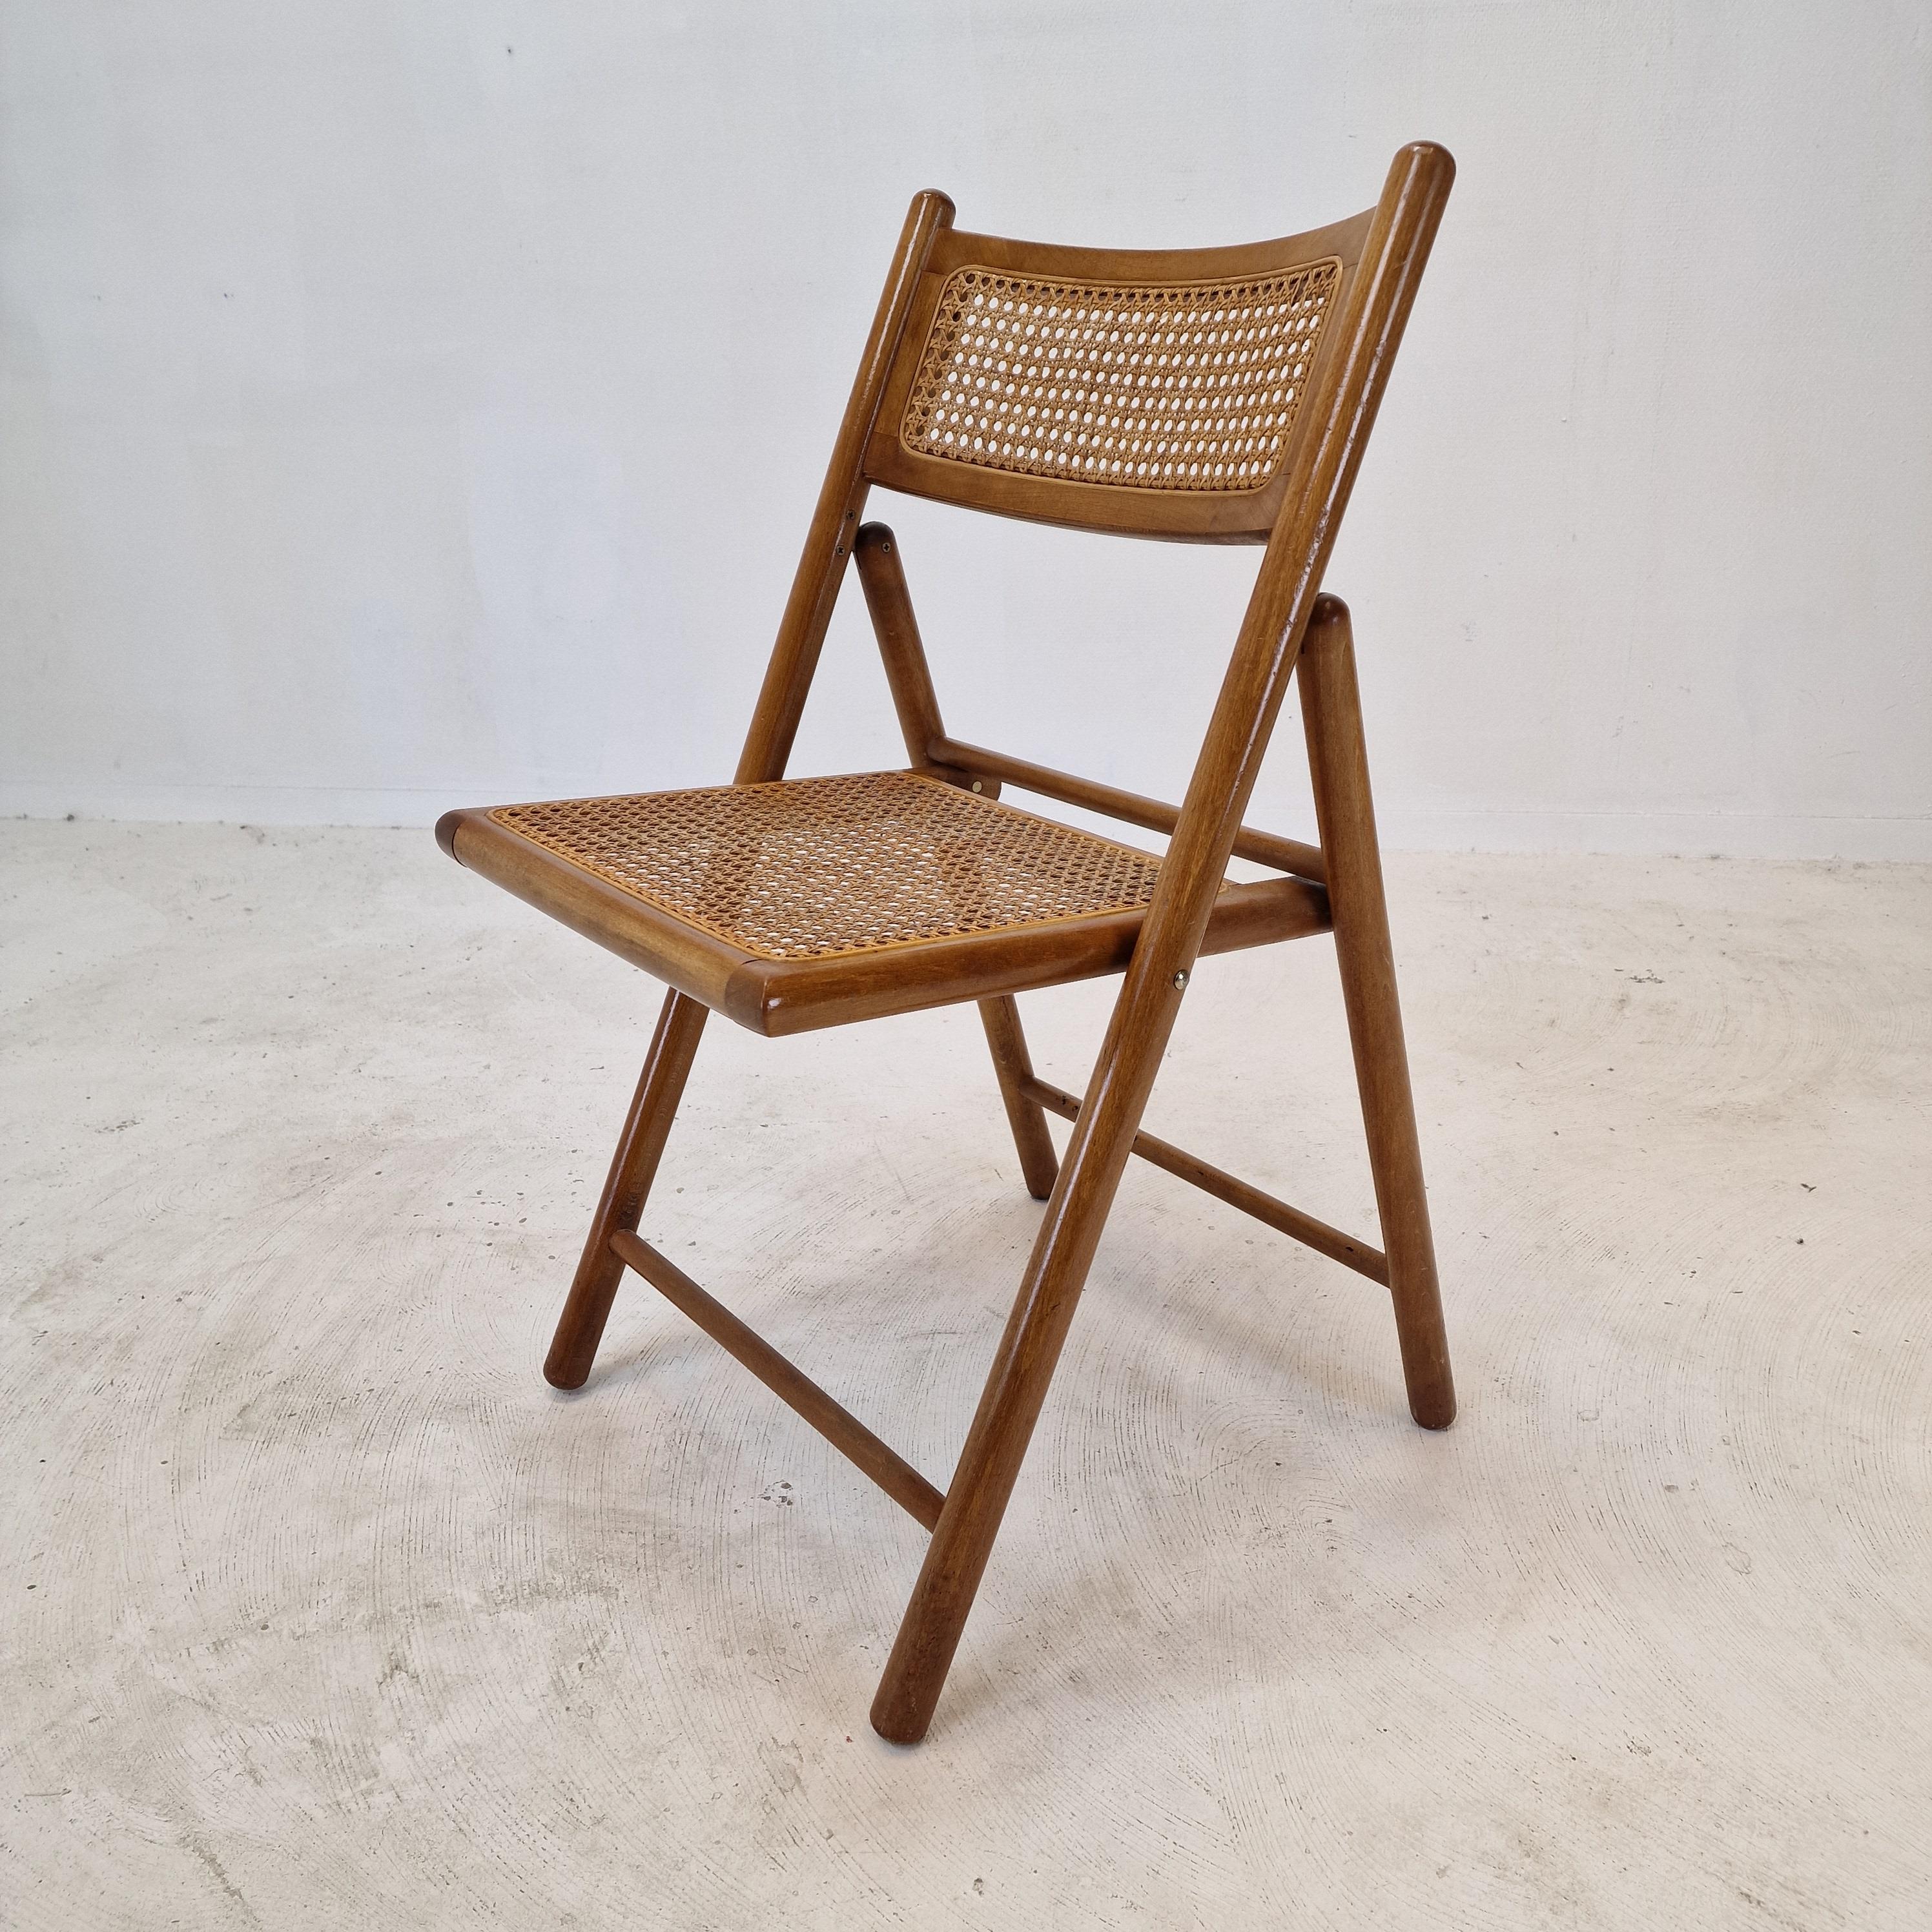 Set of 4 Italian Folding Chairs with Rattan, 1980s For Sale 7